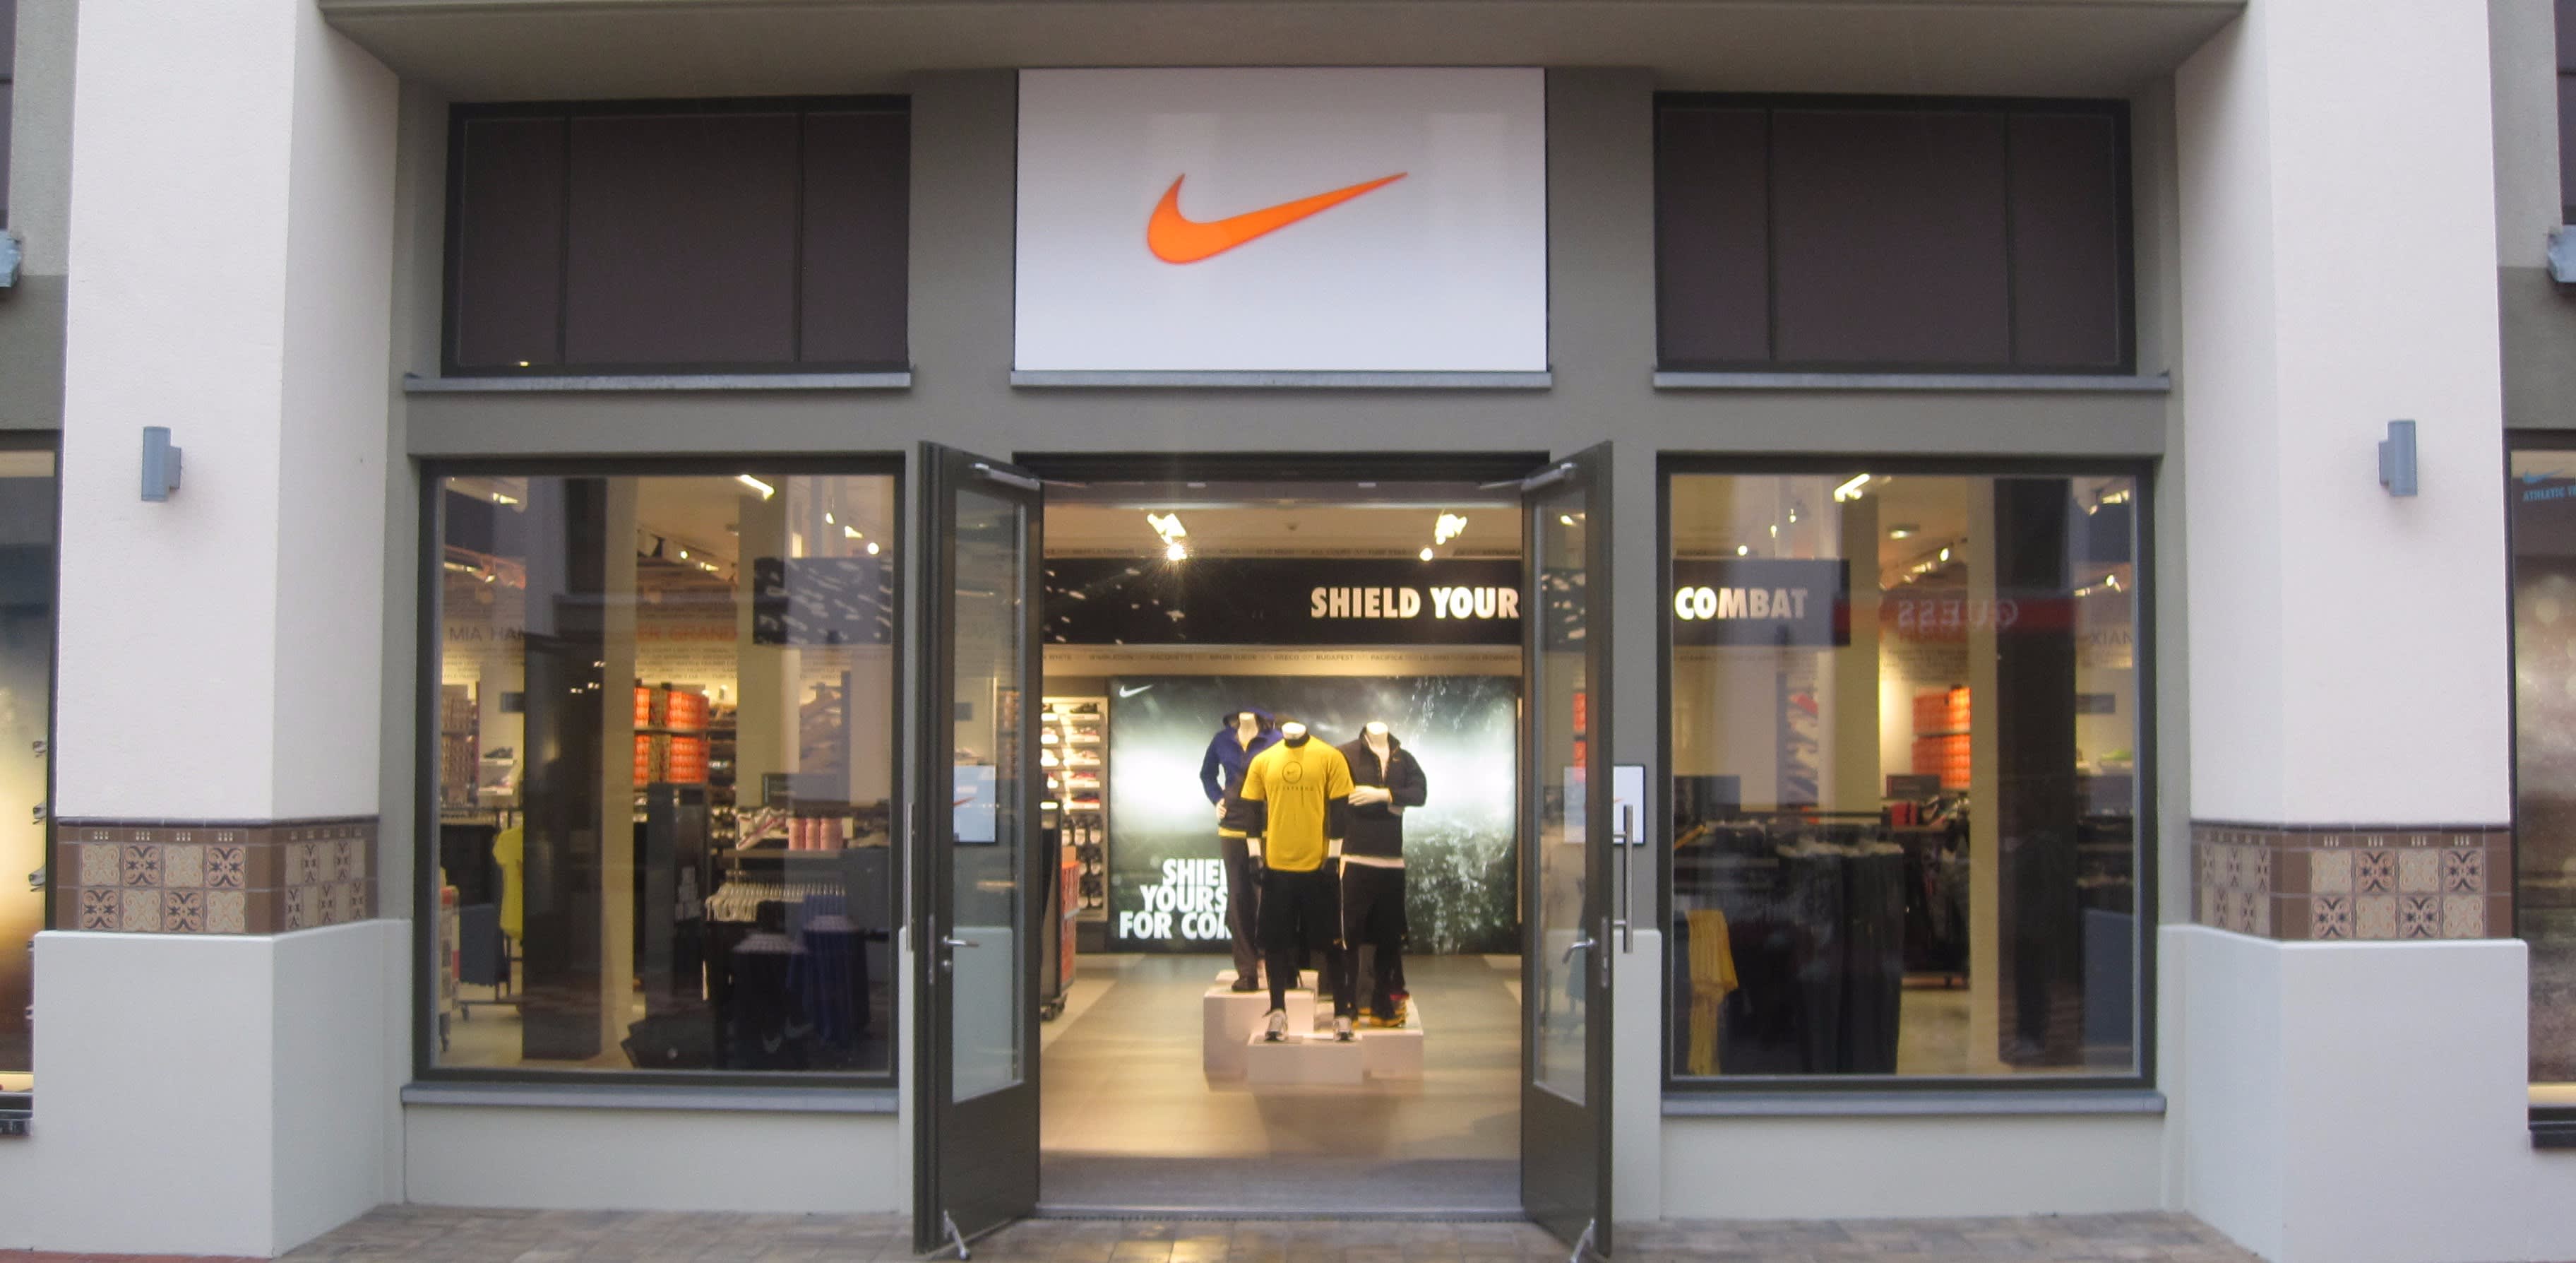 Graf ring viering Nike Stores in Bavaria, Germany. Nike.com